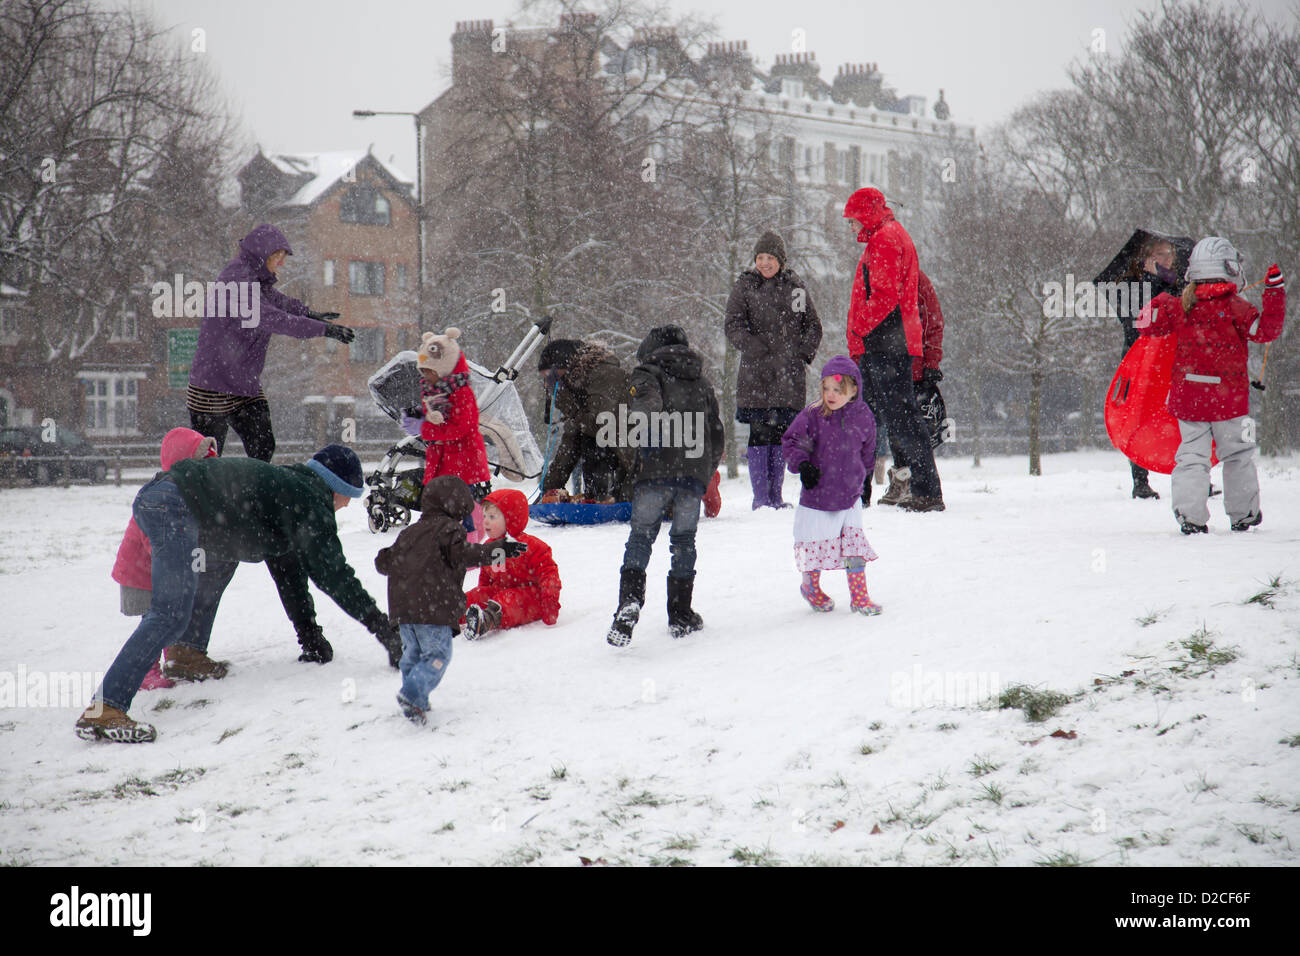 20 January 2013  13.17 PM - Snow falls on Clapham Common in Clapham, London, UK. Children playing in the snow and parents play in the snow on Clapham Common. Stock Photo